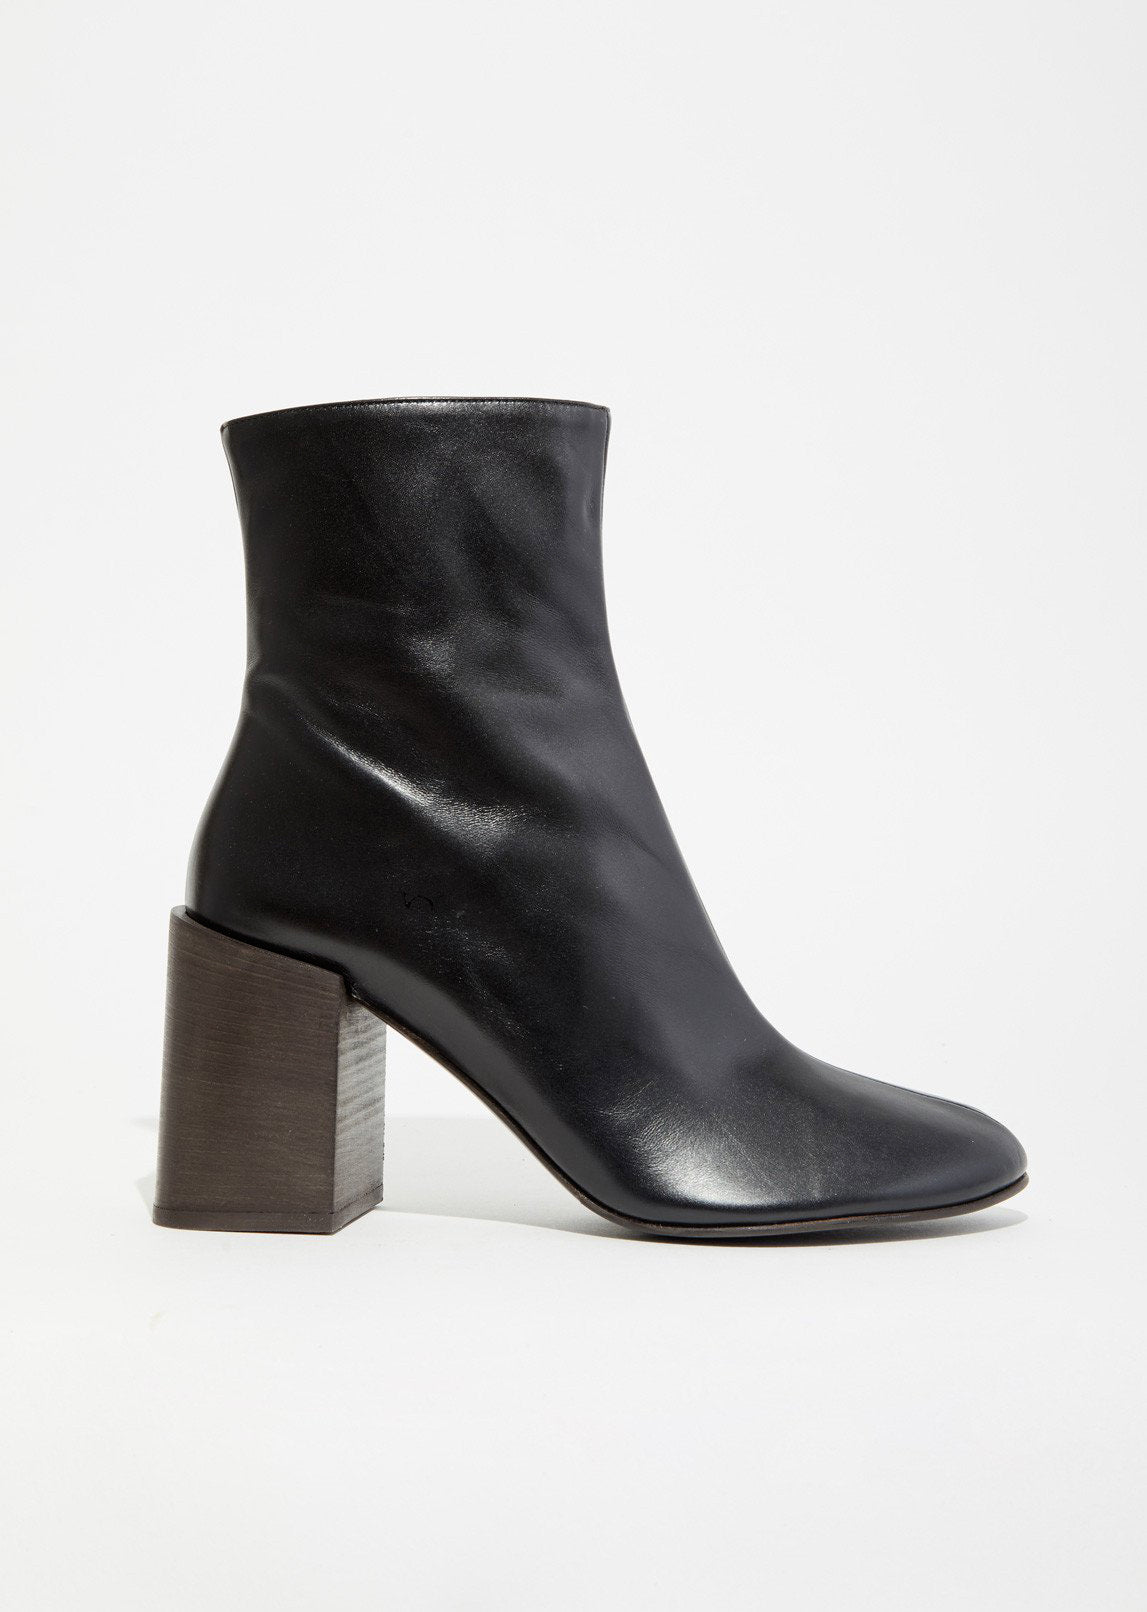 Acne Studios Square-toe Leather Ankle Boots in Black for Men